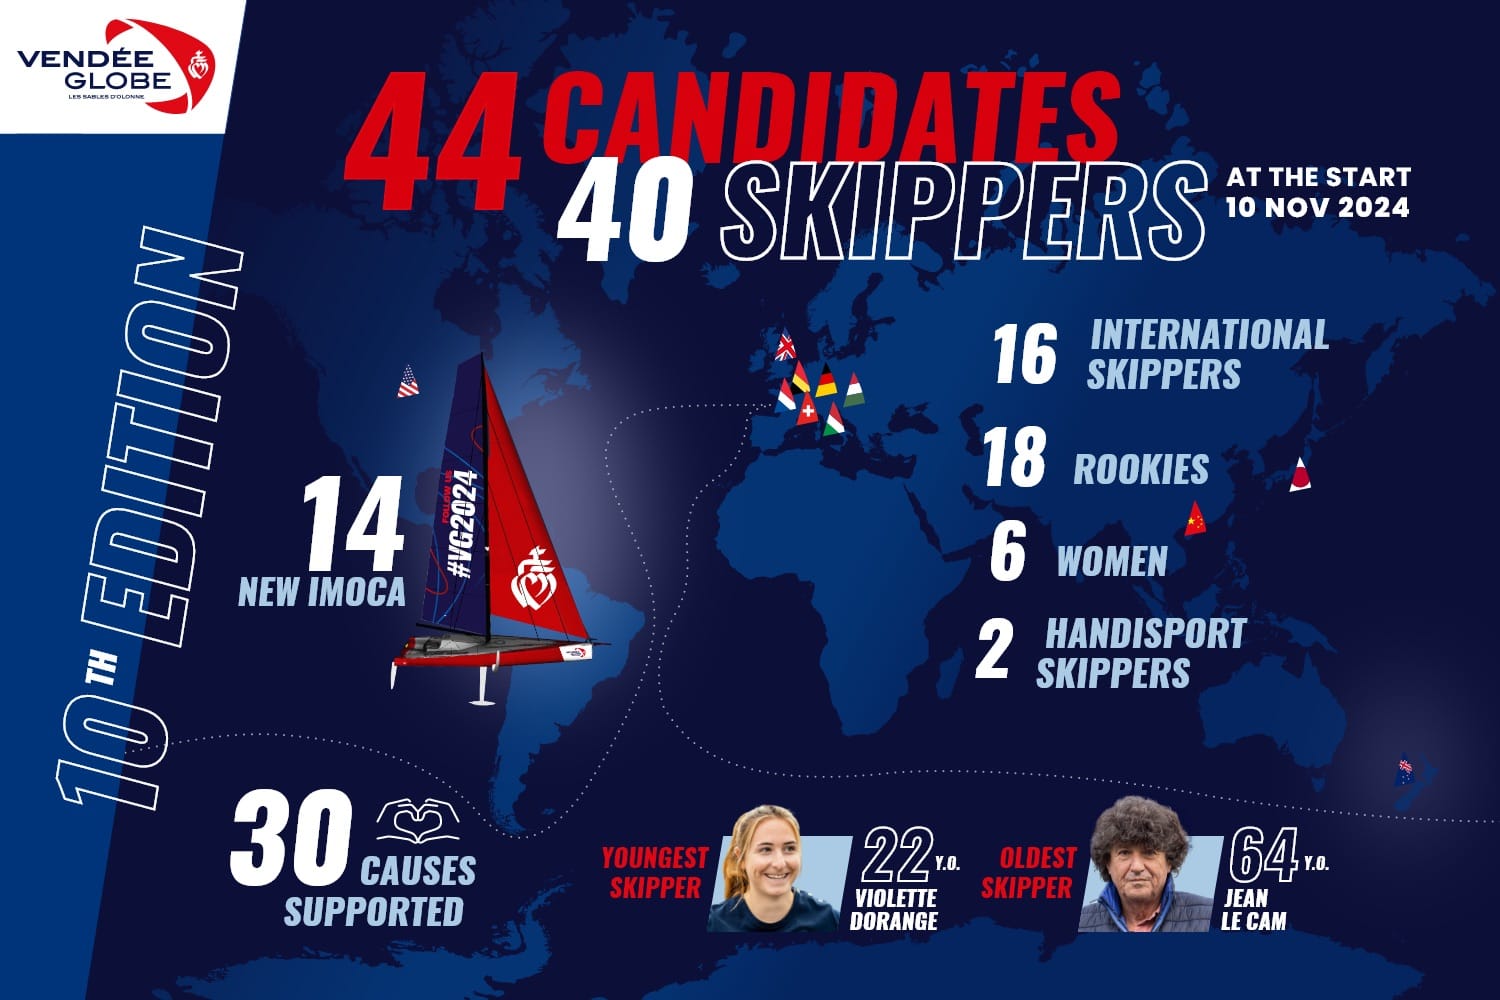 44 candidates for the Vendée Globe 2024